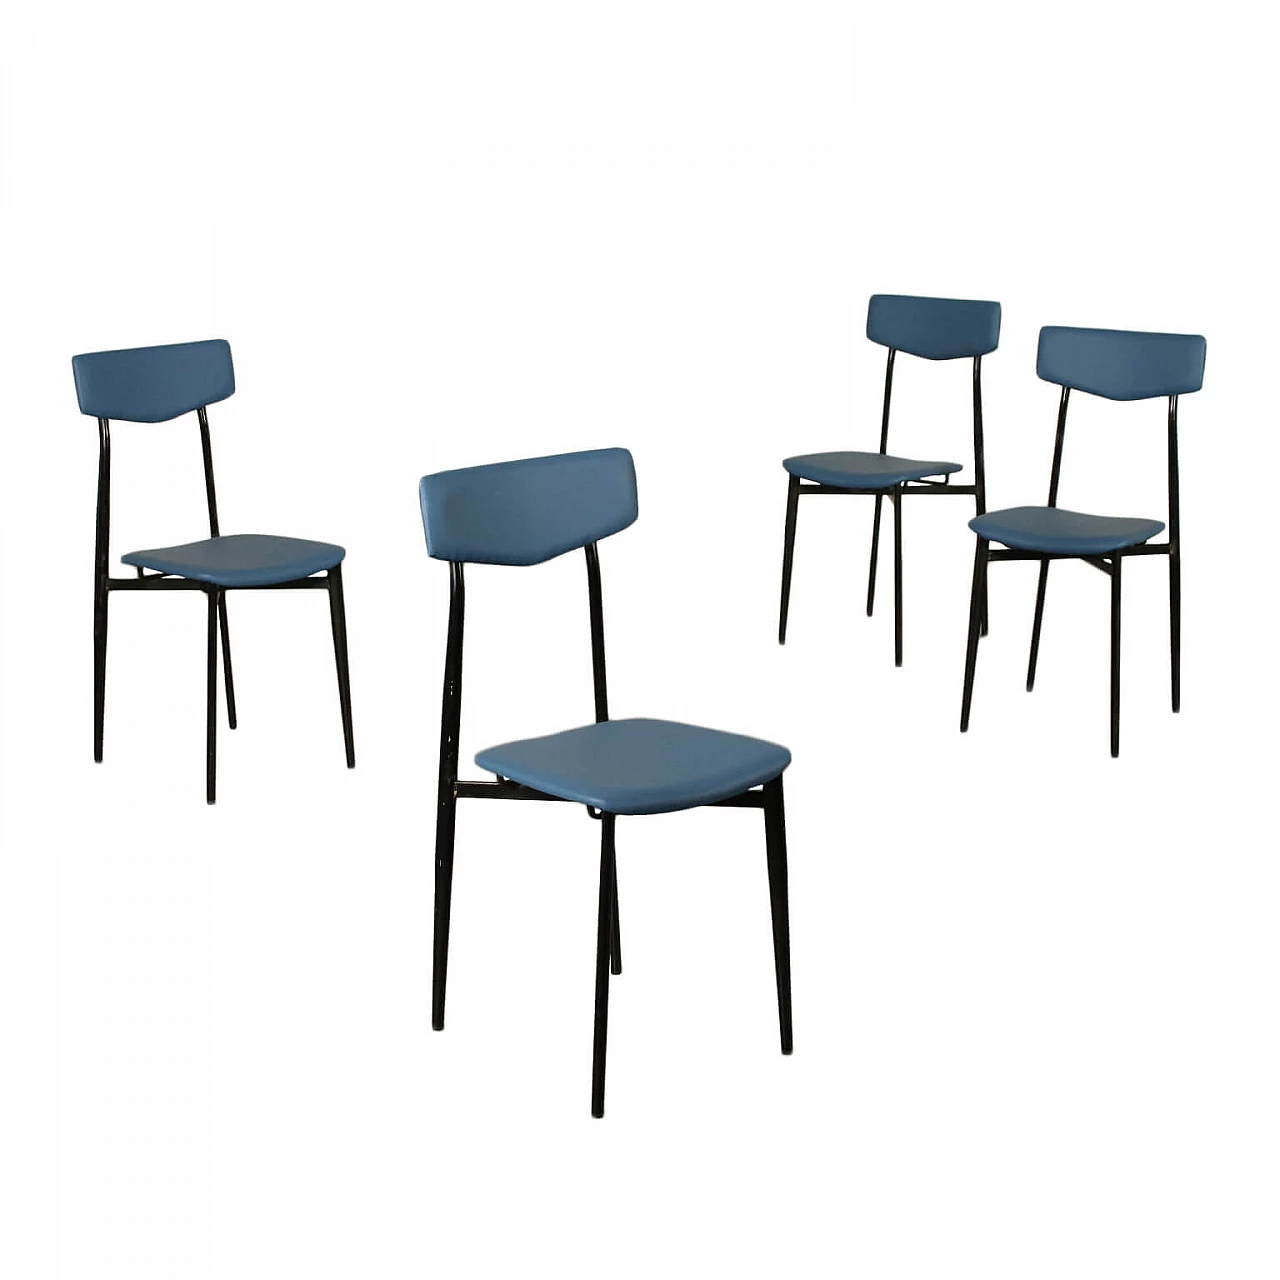 1950s-1960s chairs 1449853